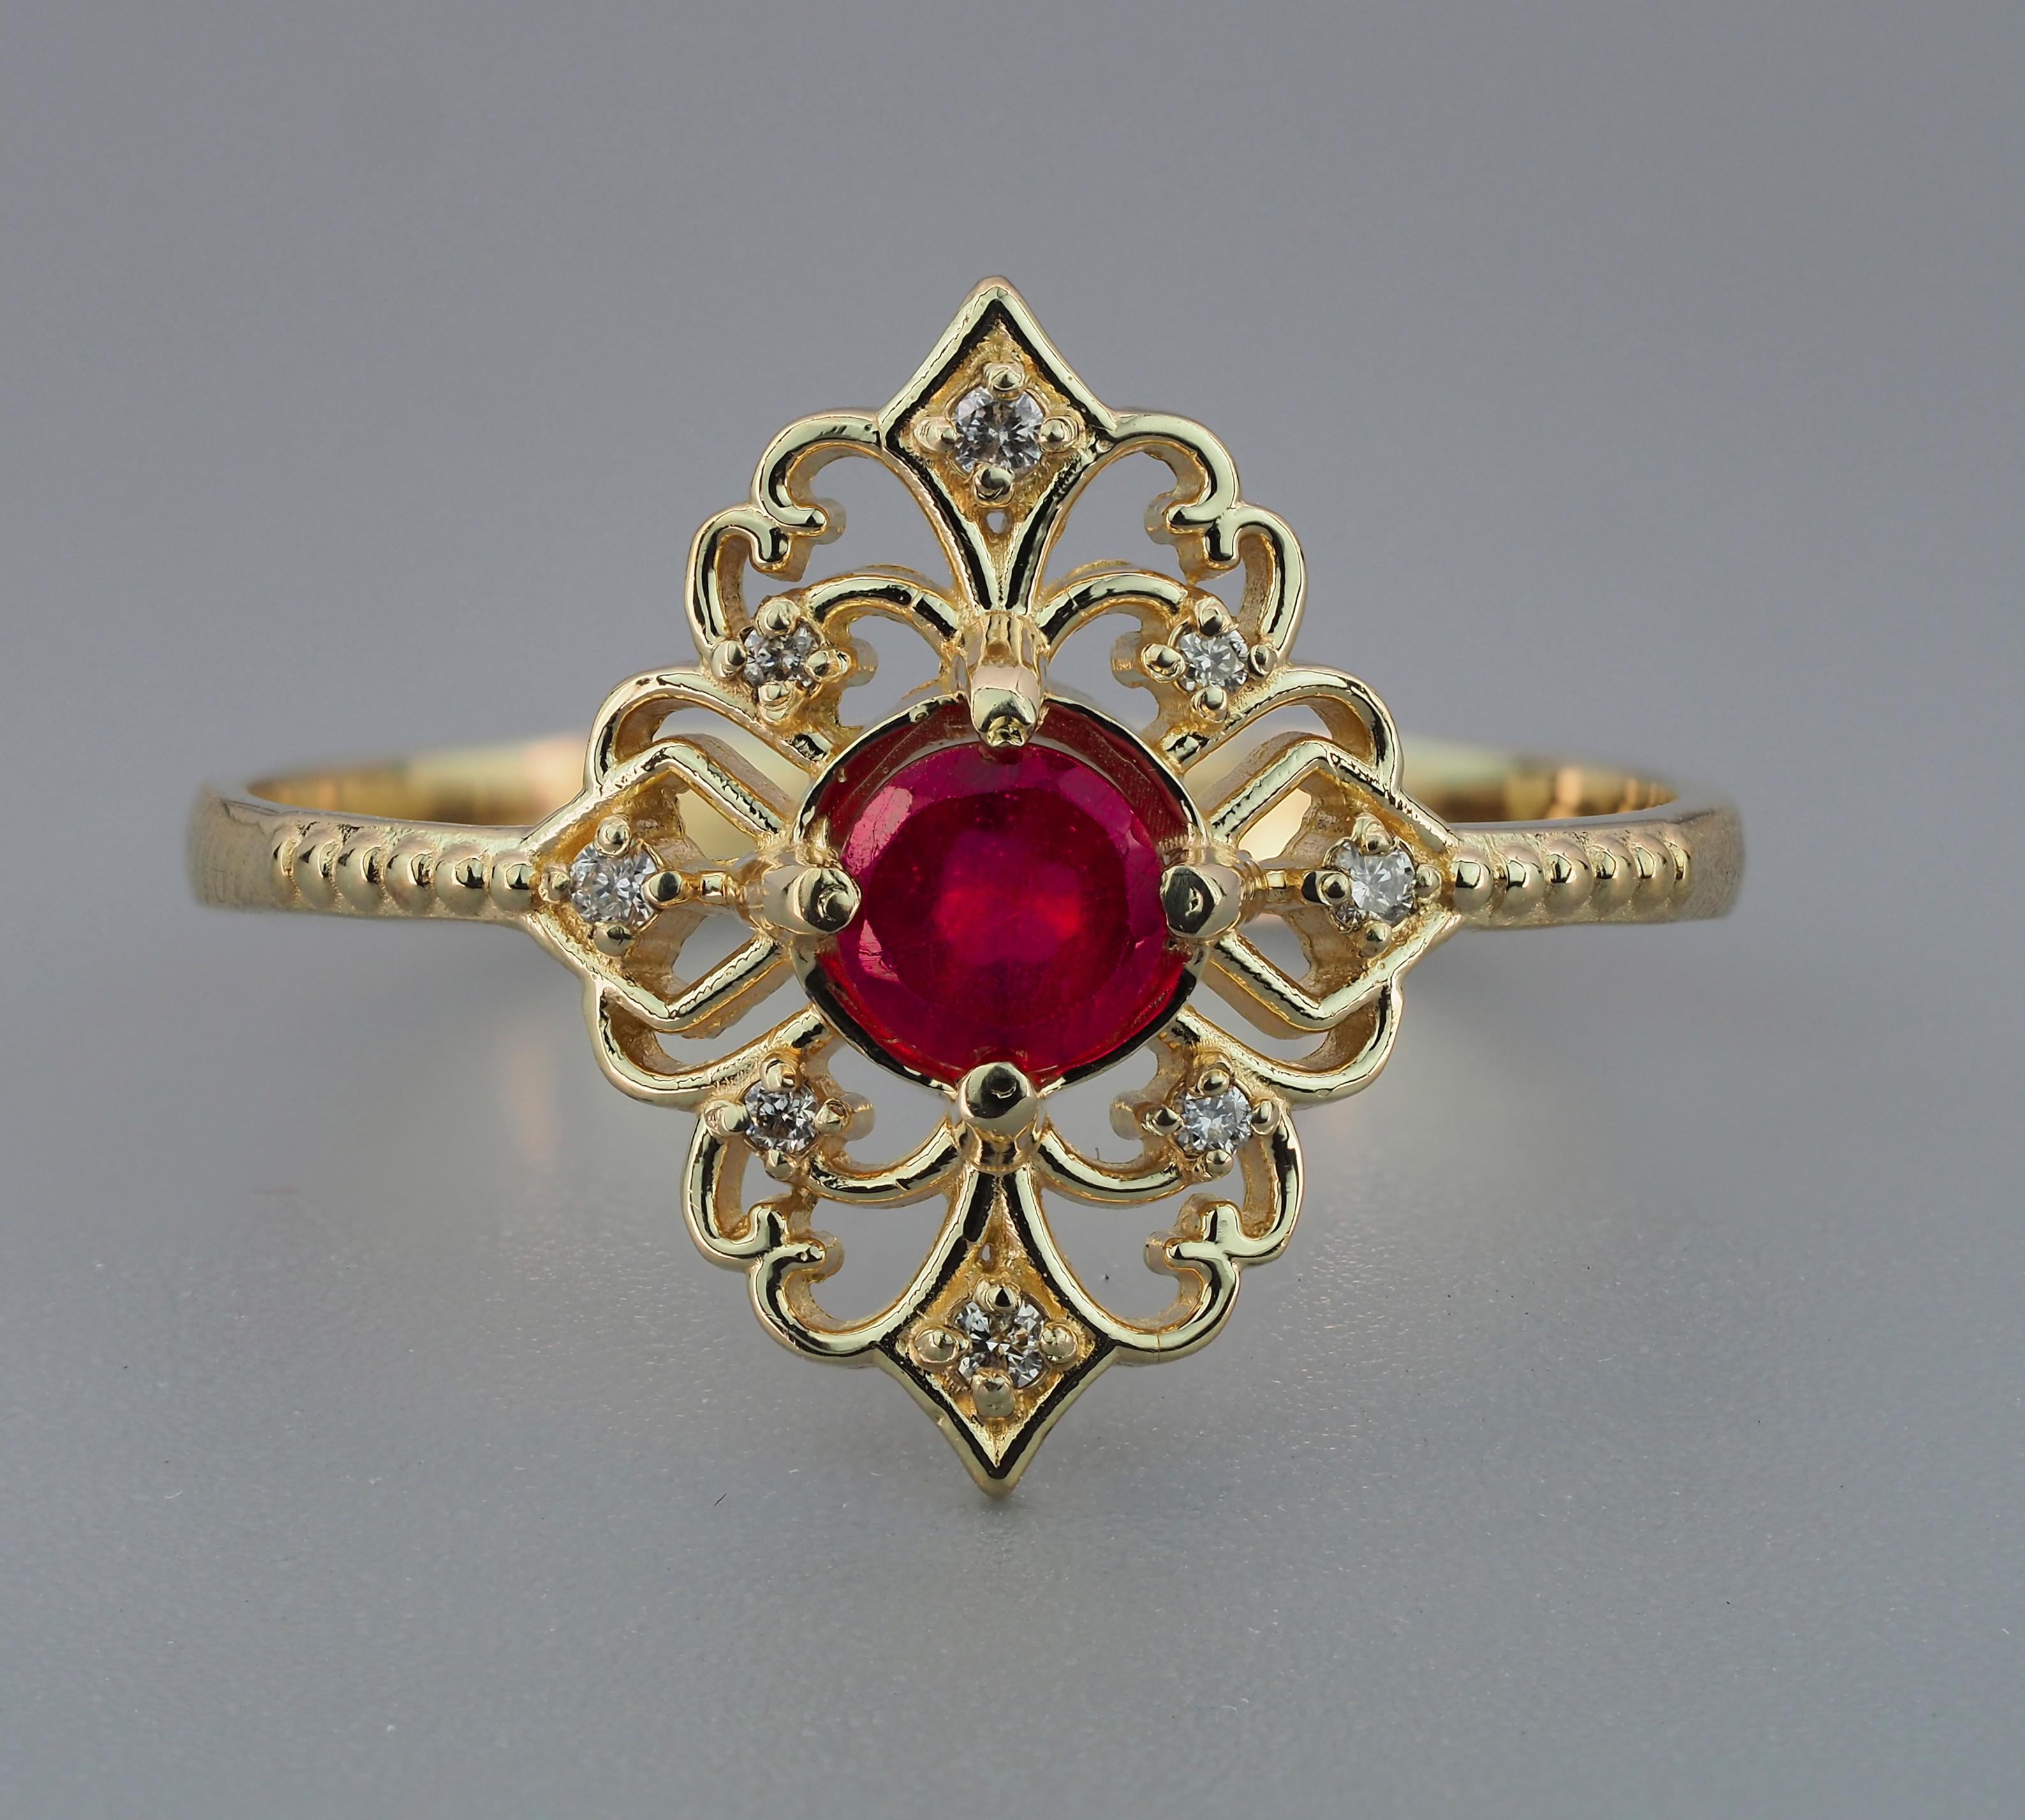 For Sale:  14 karat Gold Ring with Ruby and Diamonds. Vintage style ruby ring 3